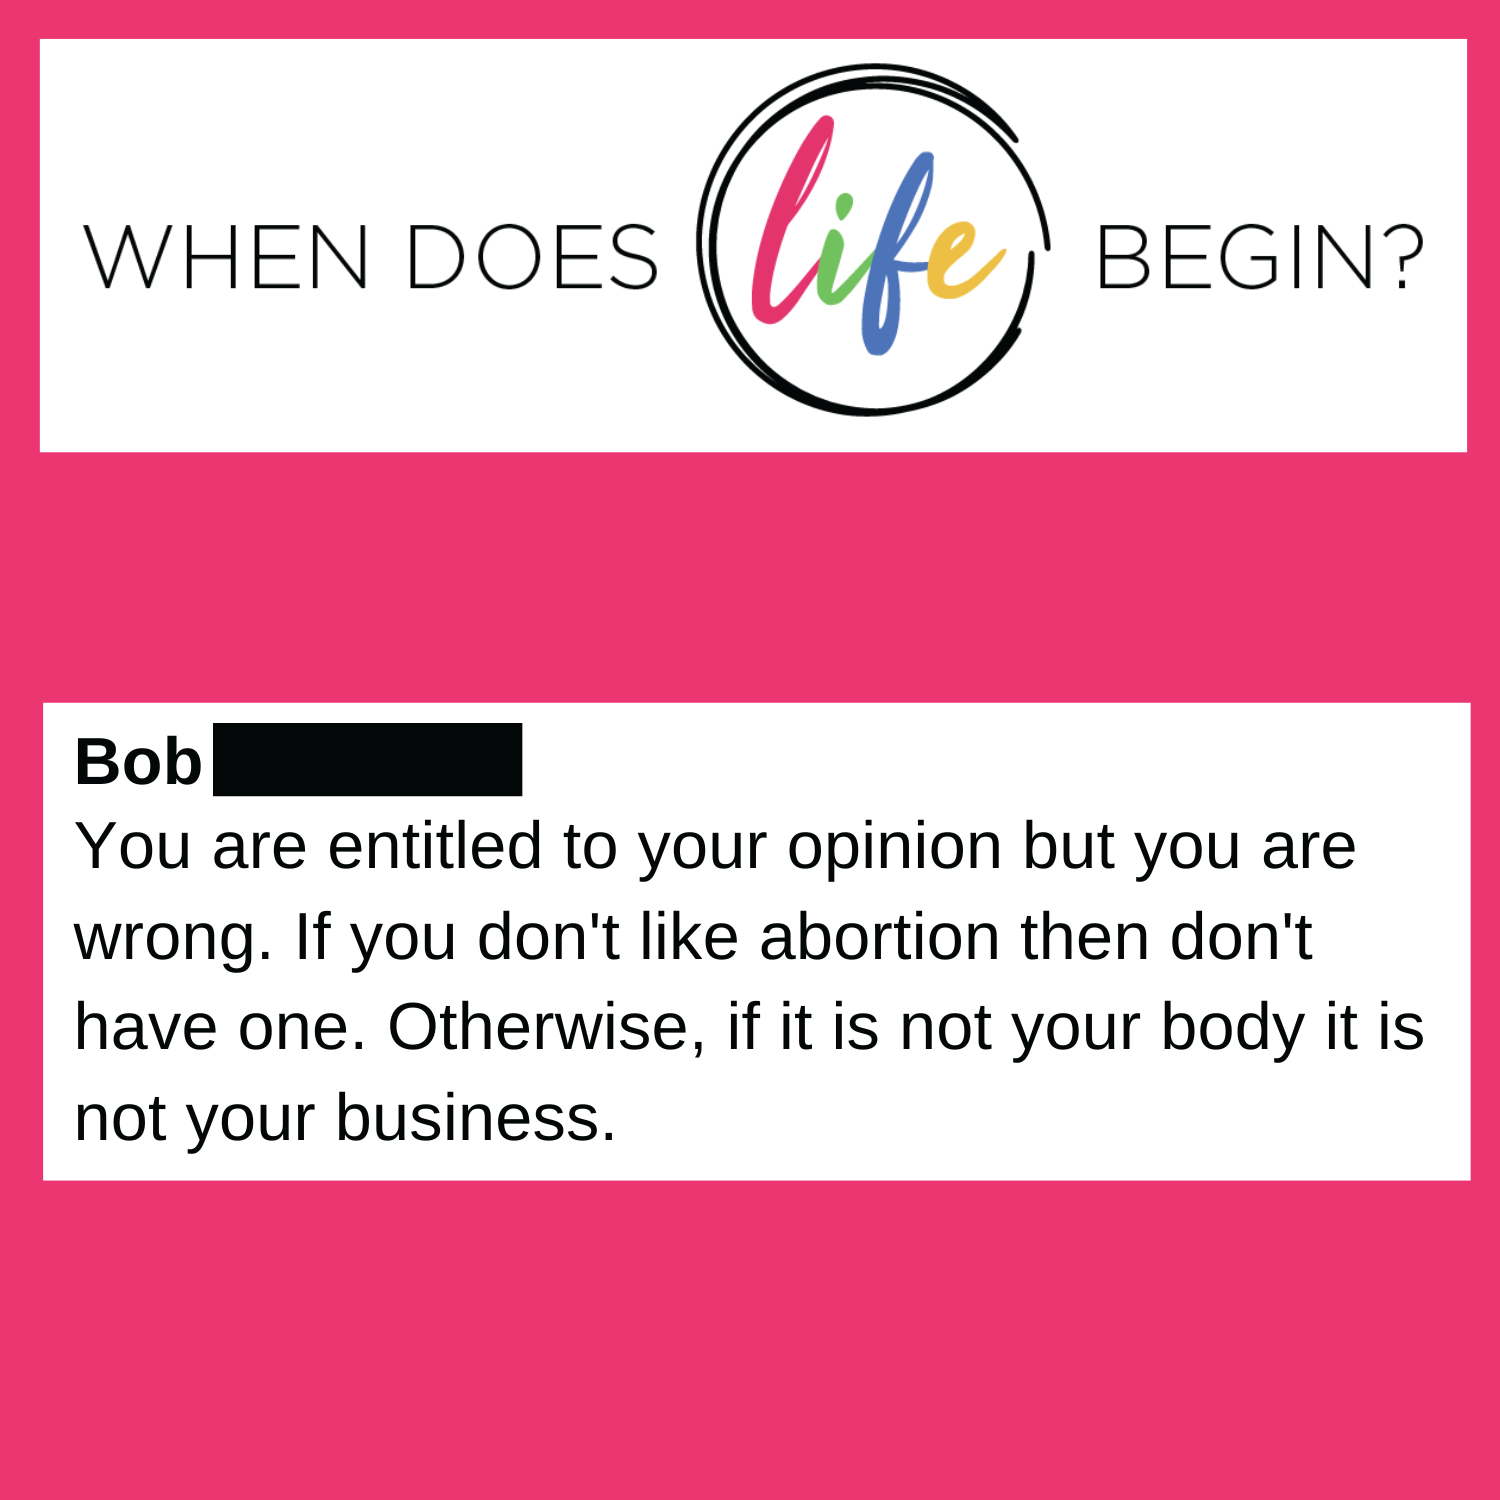 If You Don’t Like Abortion,Don’t Get One